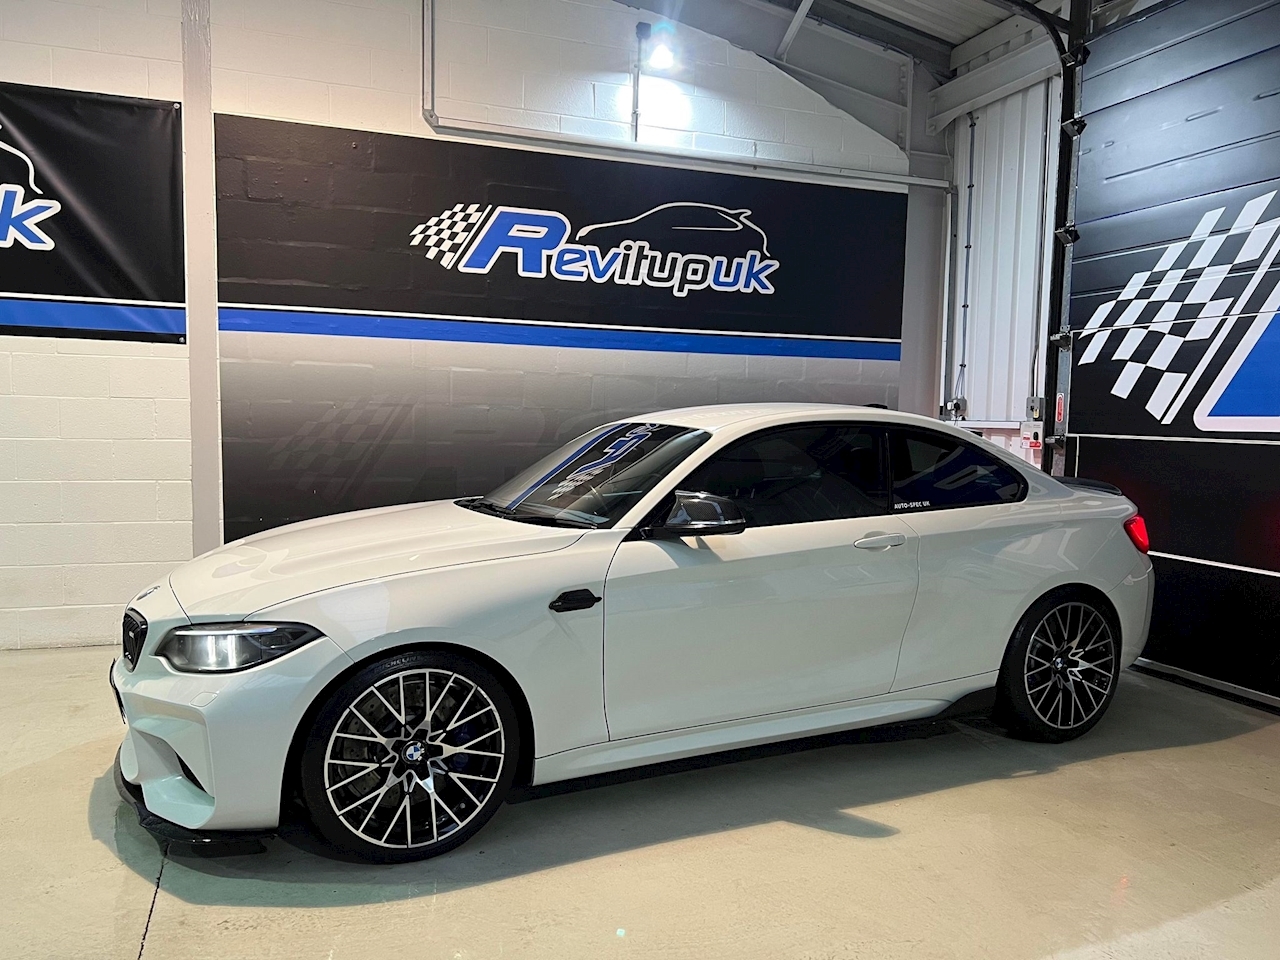 3.0i Coupe 2dr Petrol DCT (s/s) (185 g/km, 365 bhp)